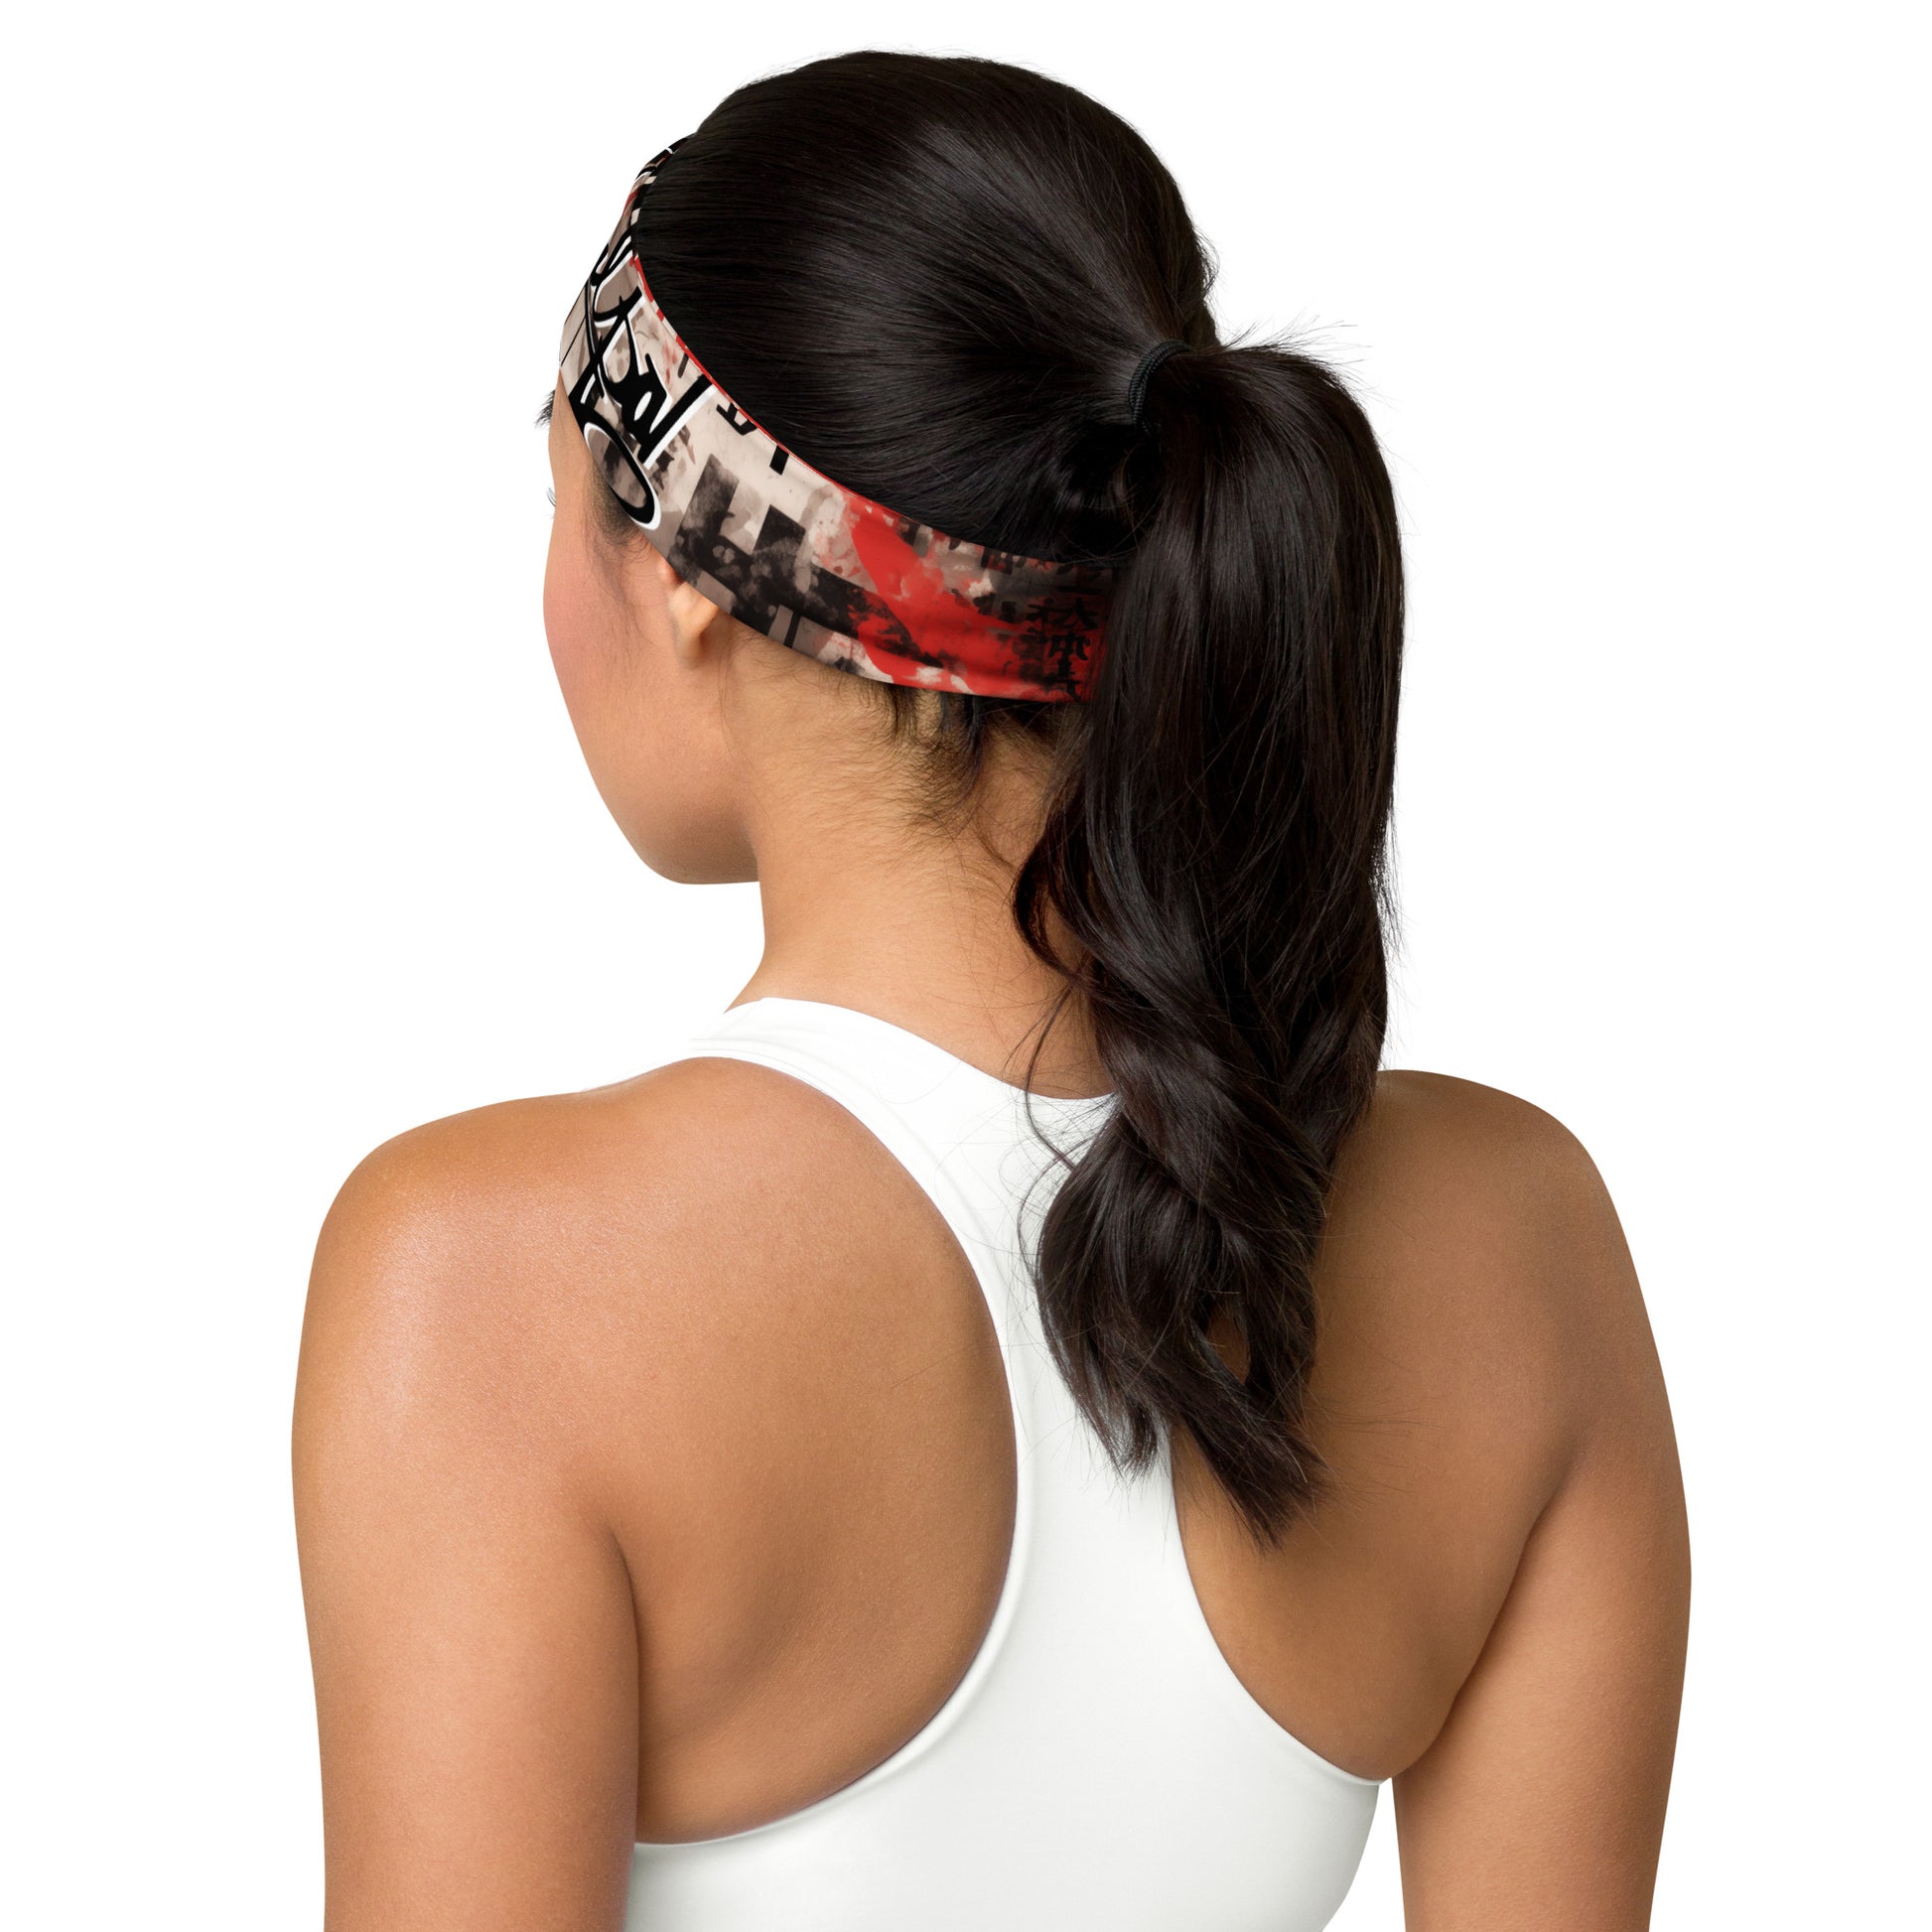 Rooted in Tradition, Defined by Today:  The MeaKulpa Red-Washed Newspaper Inspired Headband embodies the brand's dedication to innovation and style. Immerse yourself in the vibrant echoes of tradition, reimagined for the modern world.